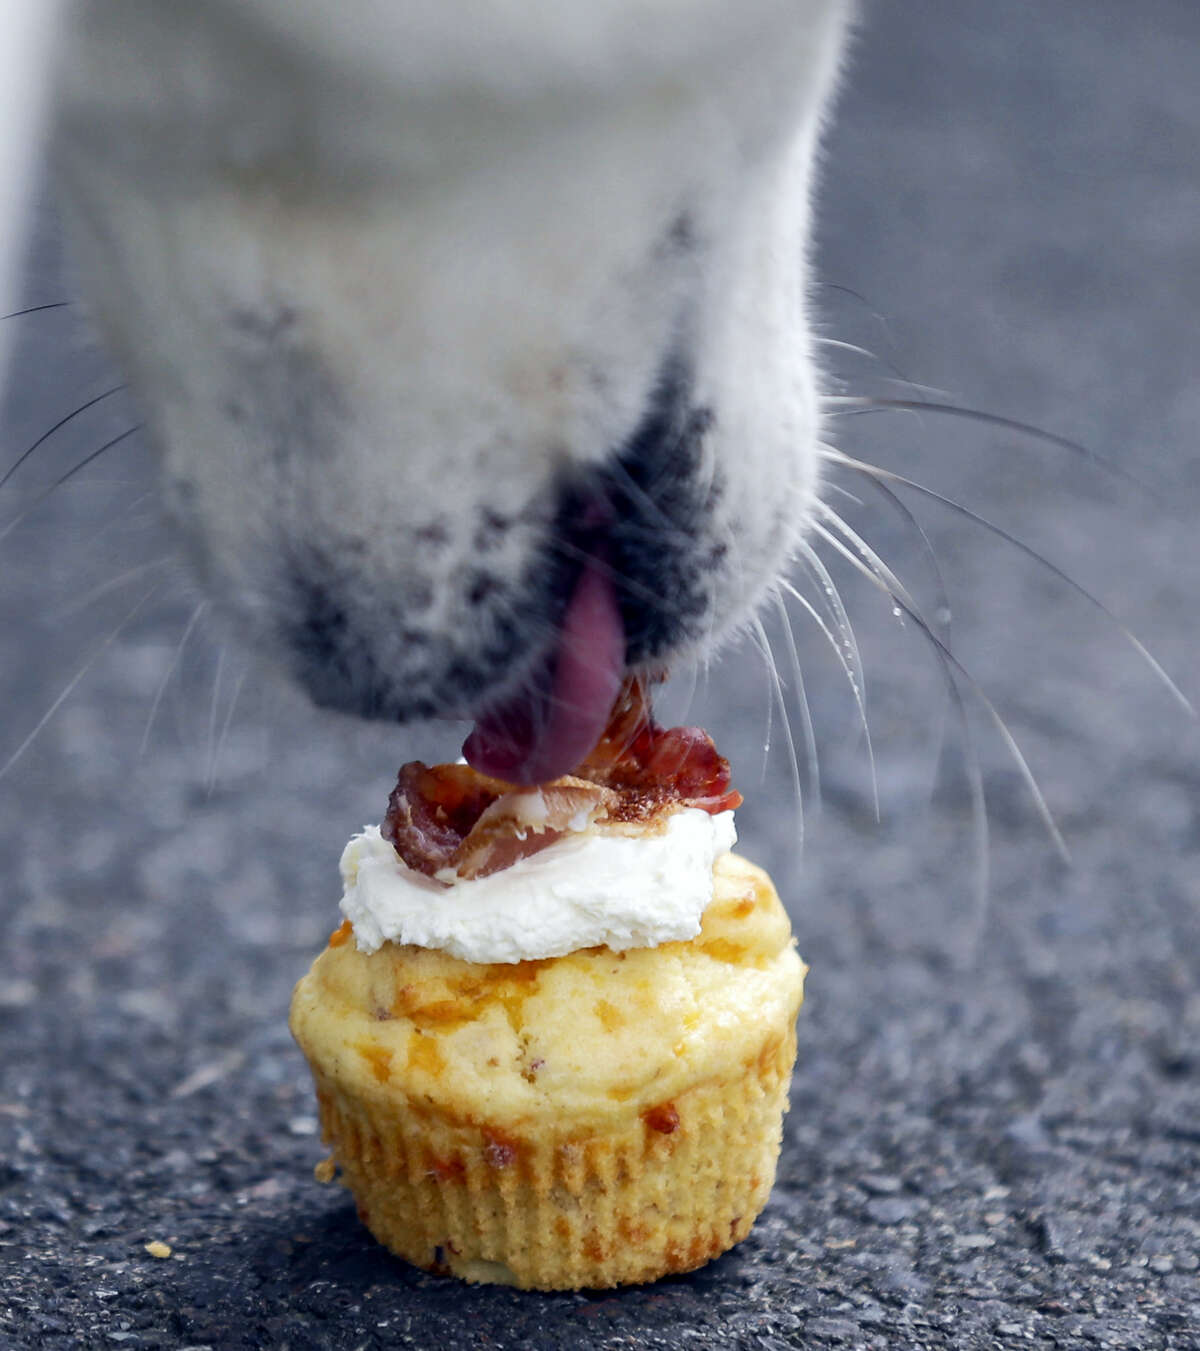 (Ted S. Warren - The Associated Press) A dog enjoys a “bacon pupcake” outside the Seattle Barkery, a food truck specializing in treats for dogs during the lunch hour at the headquarters for Zumiez, in Lynnwood, Wash.